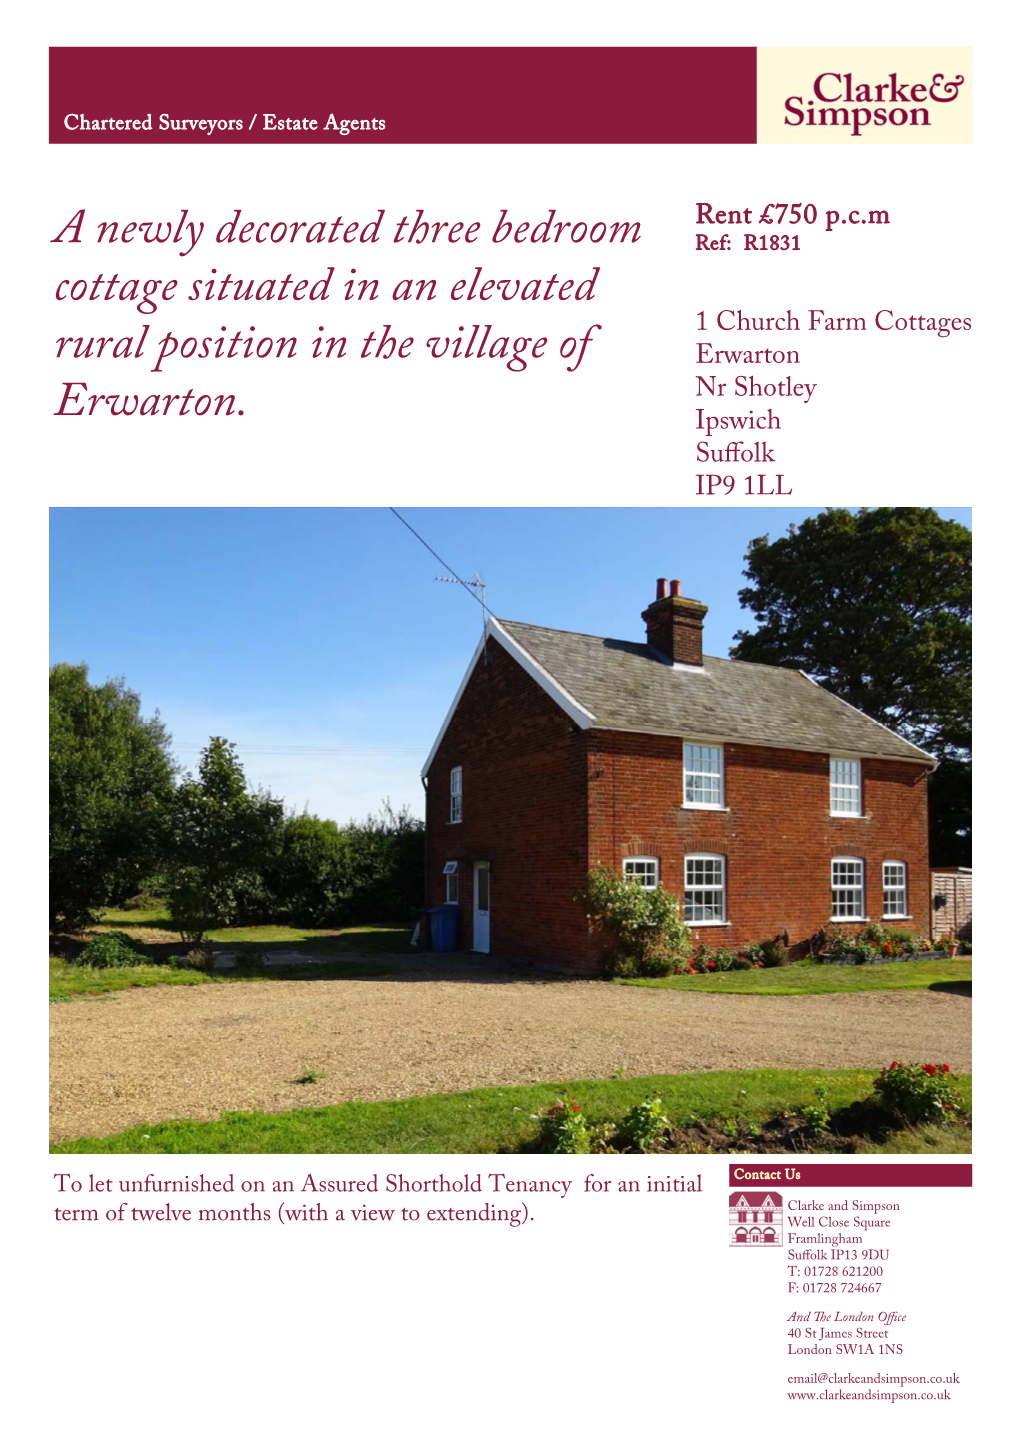 R1831 Cottage Situated in an Elevated 1 Church Farm Cottages Rural Position in the Village of Erwarton Nr Shotley Erwarton